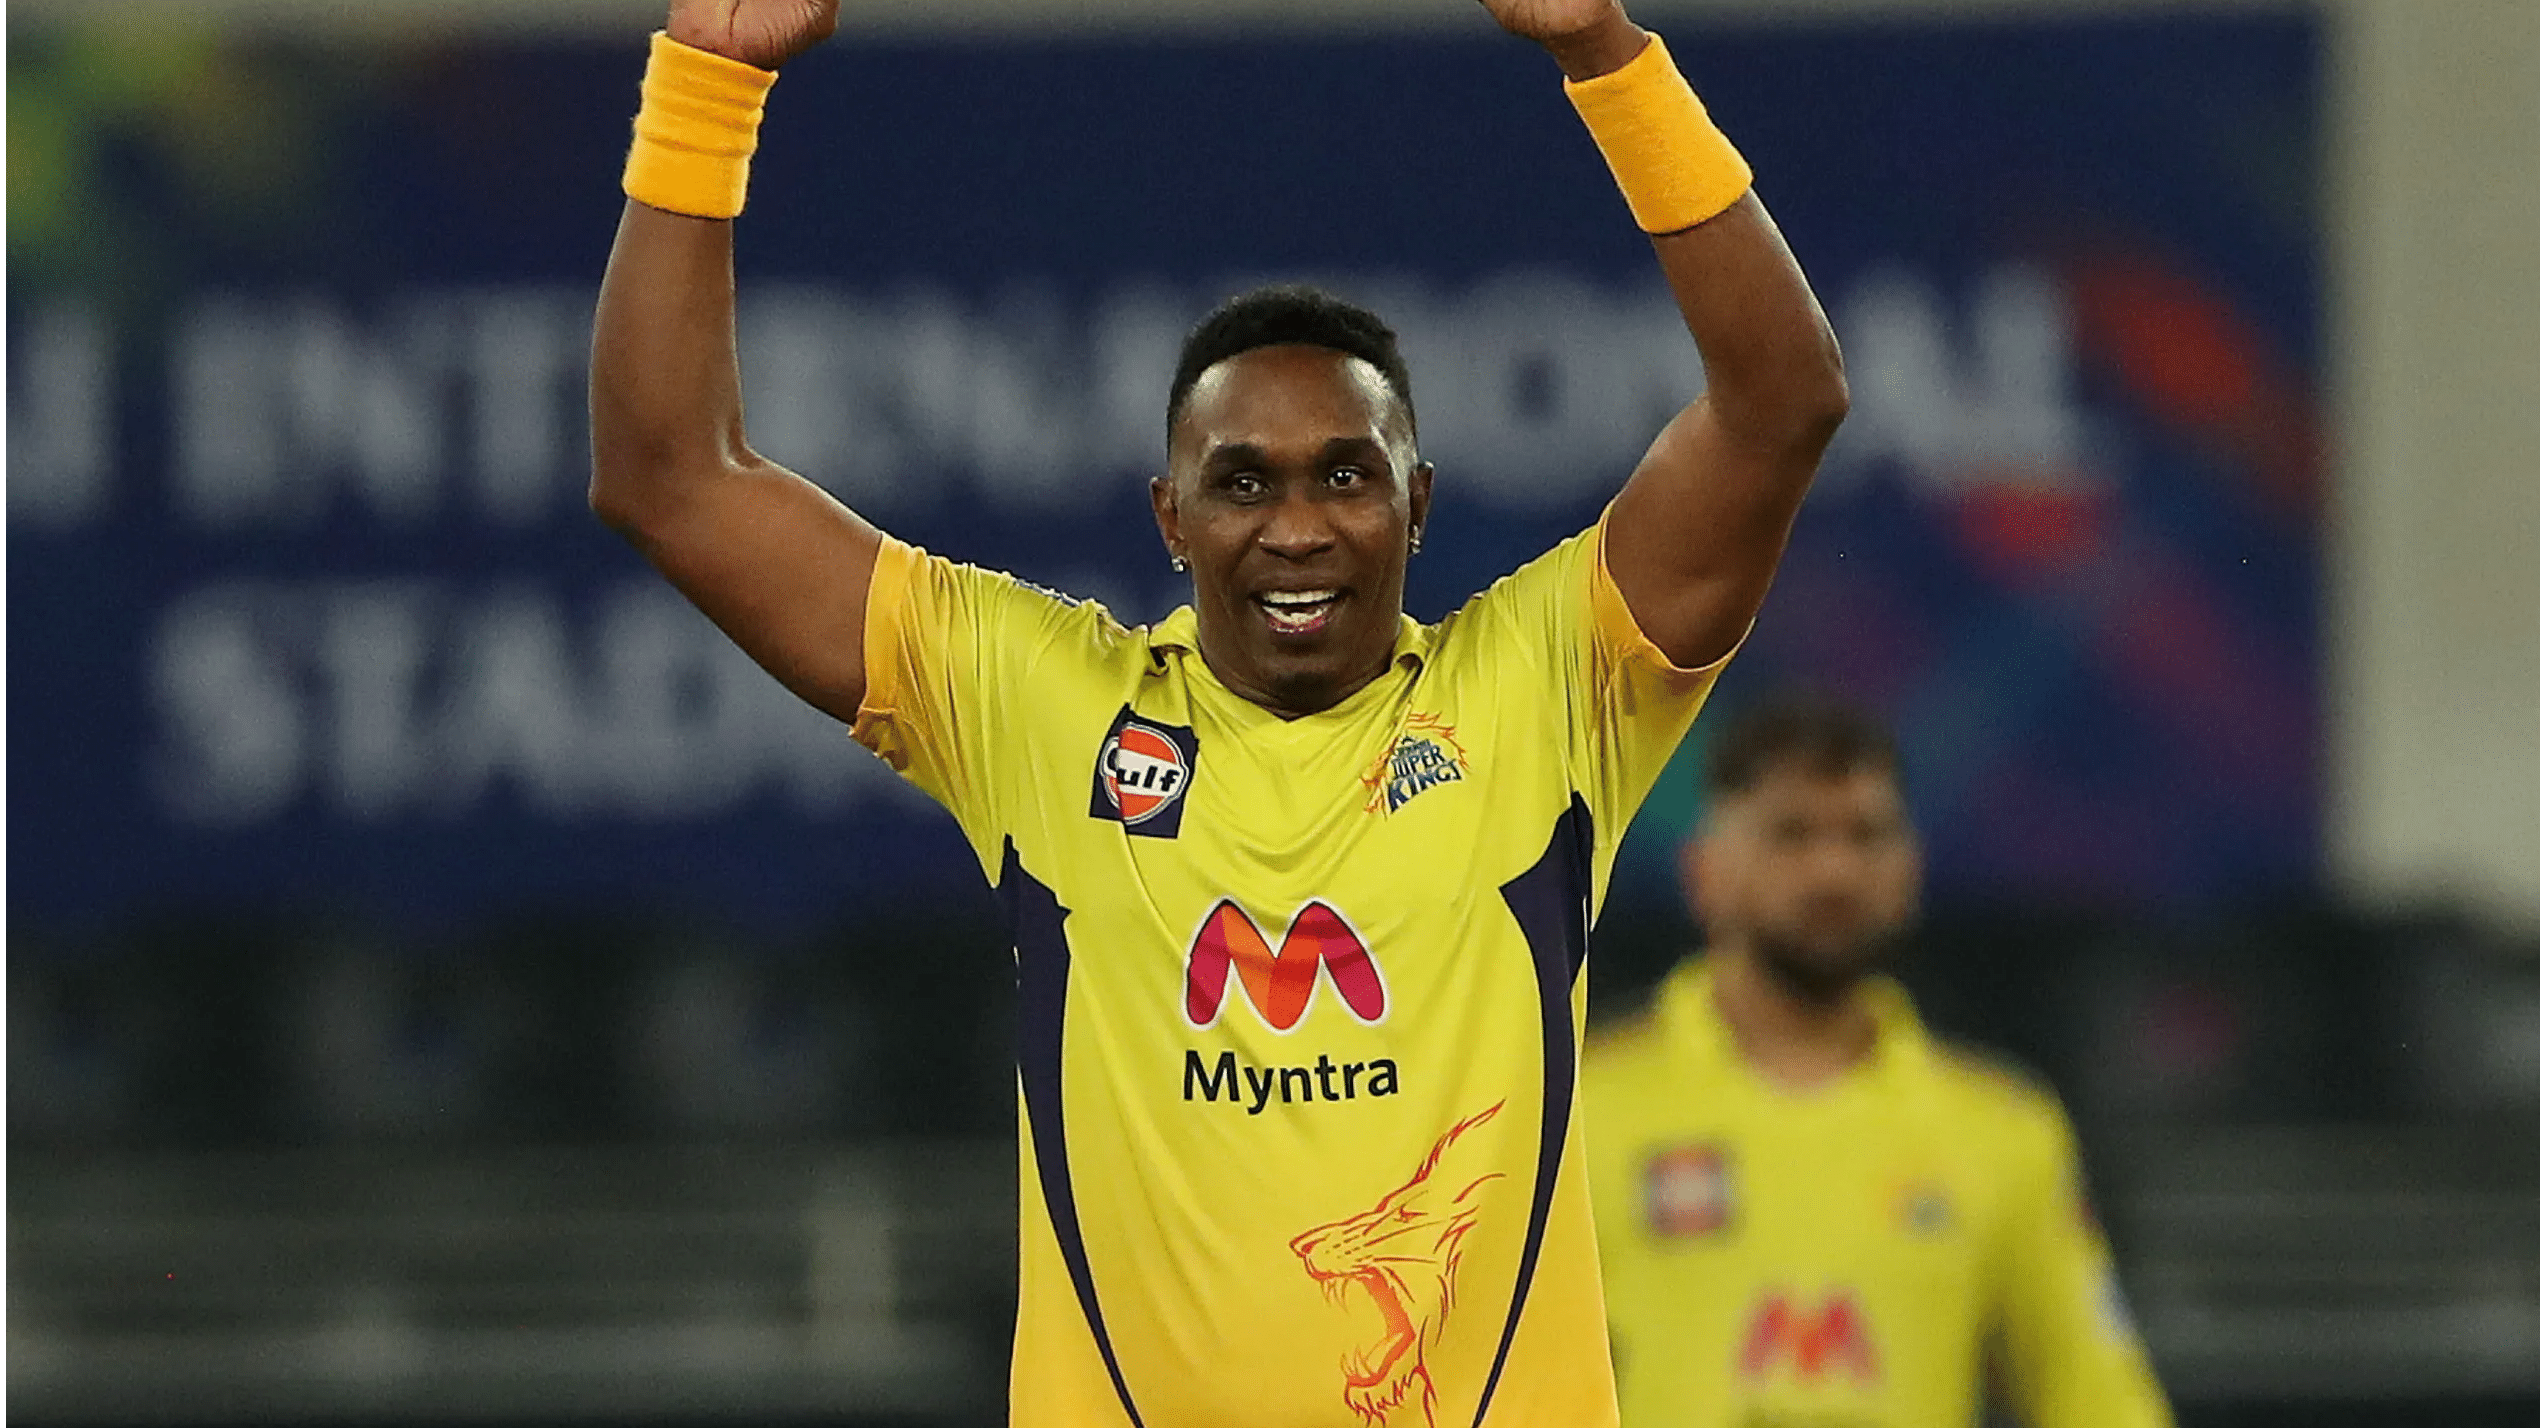 IPL 2021: Chennai Super Kings’ Dwayne Bravo believes experience can defeat youth in T20s